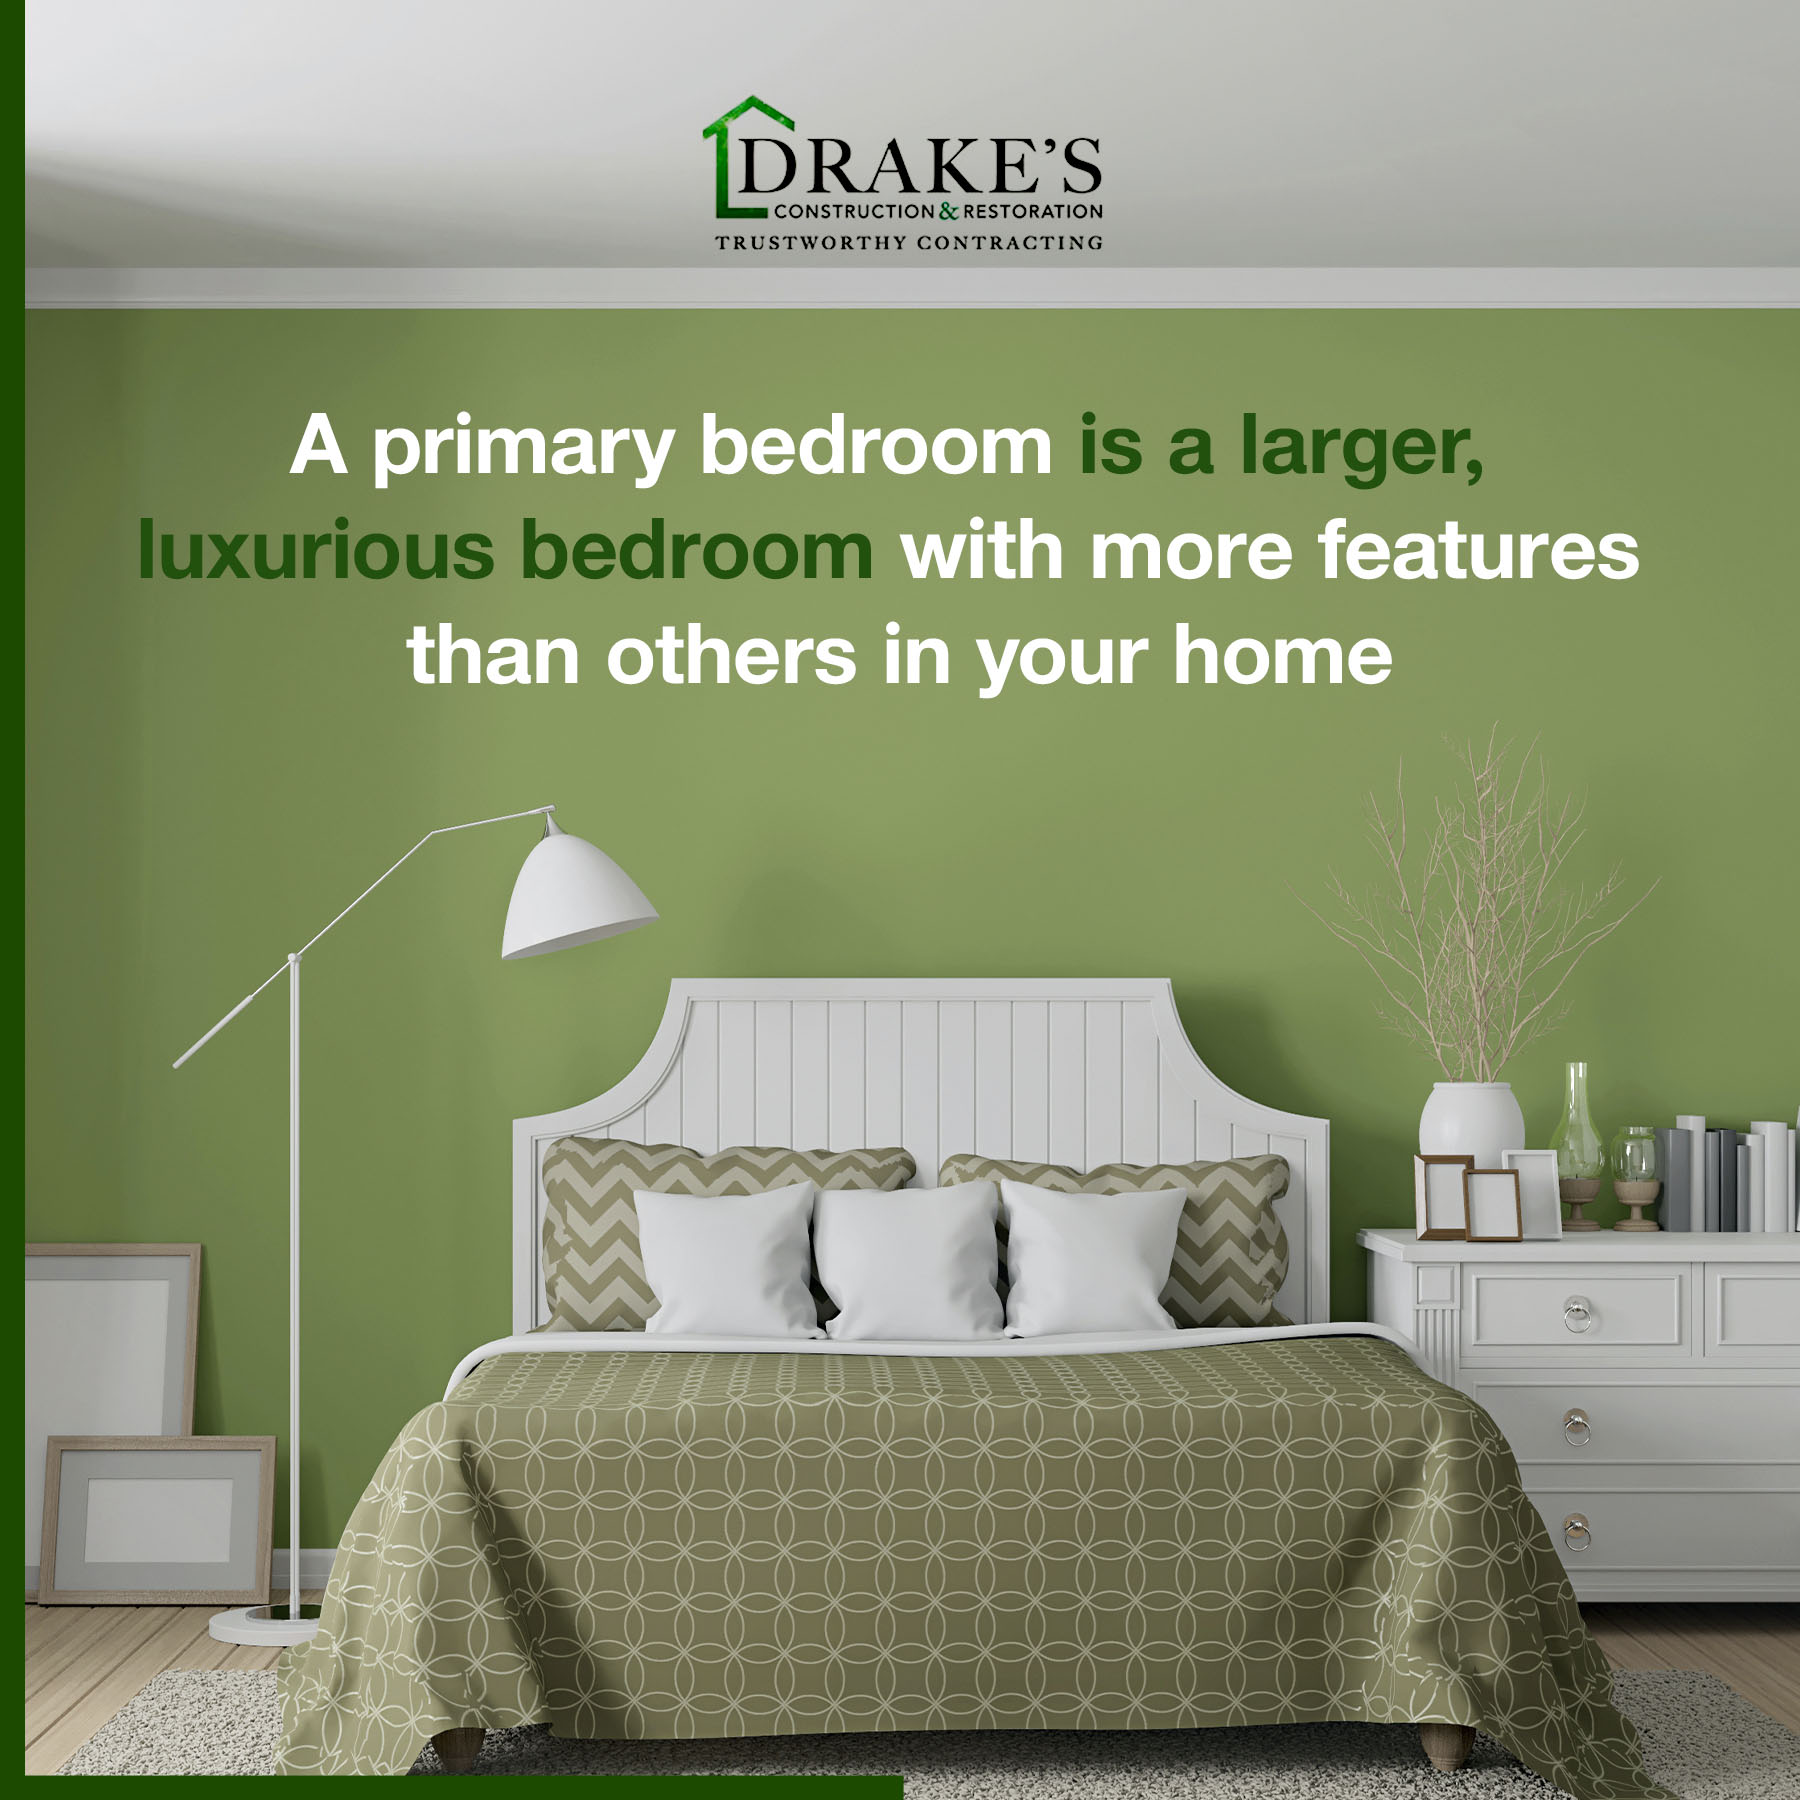 Add a Master Suite to Your Home With Drake's Construction & Restoration